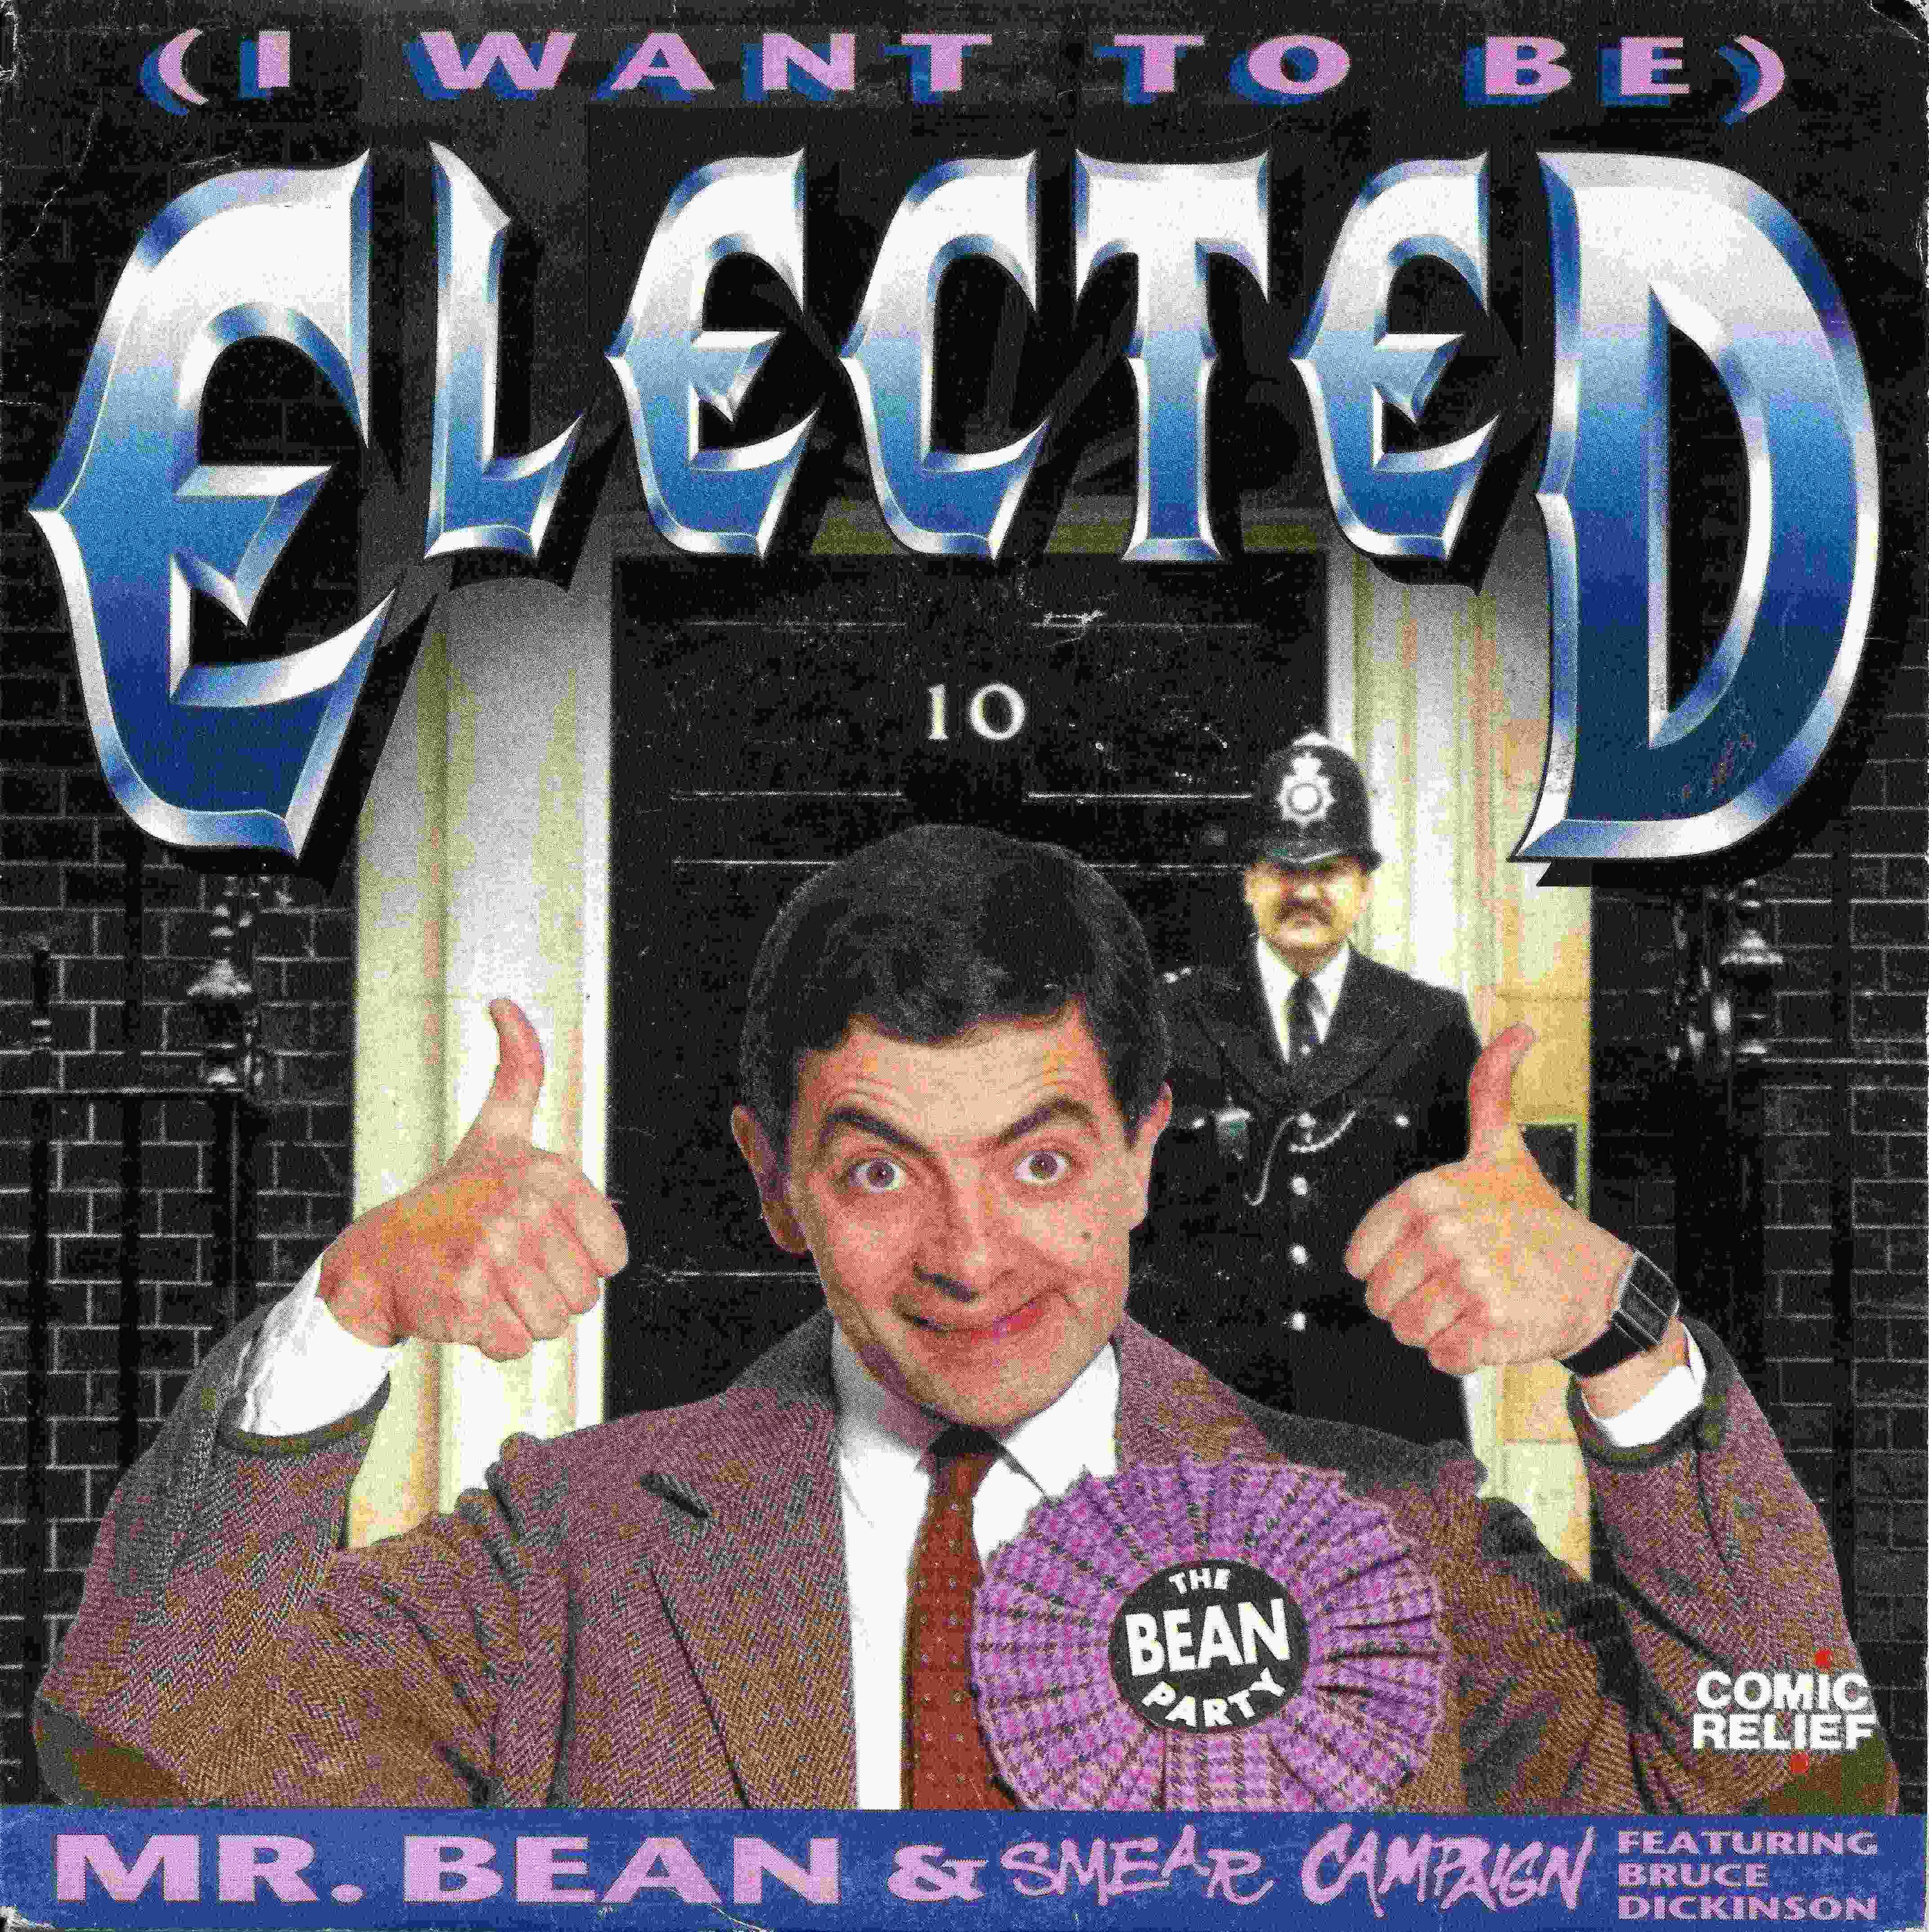 Picture of LON 319 (I want to be) Elected by artist Mr. Bean / Smear Campaign from the BBC records and Tapes library